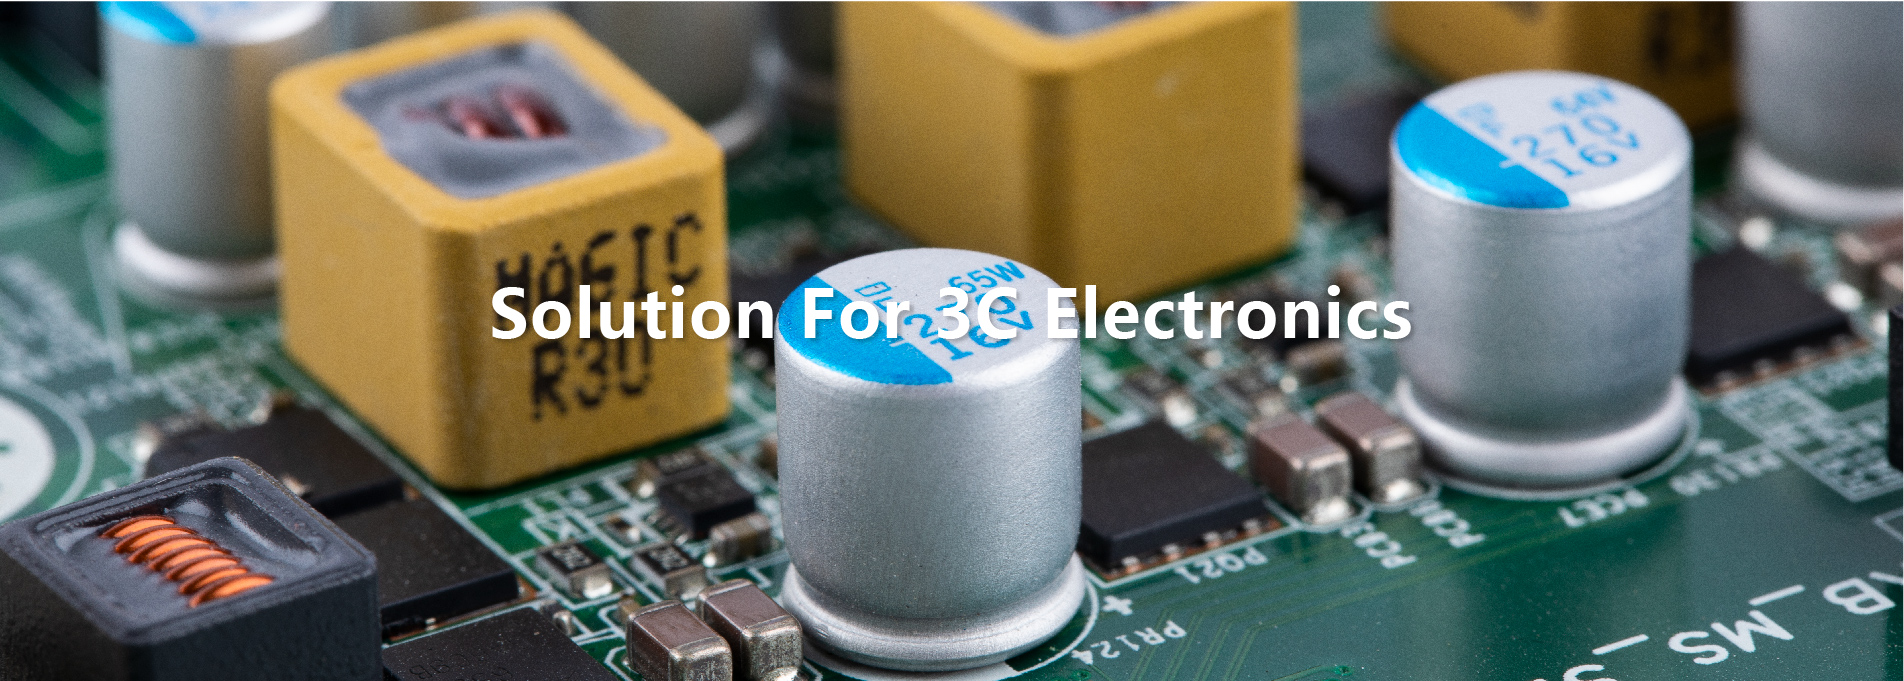 Solution For 3C Electronics